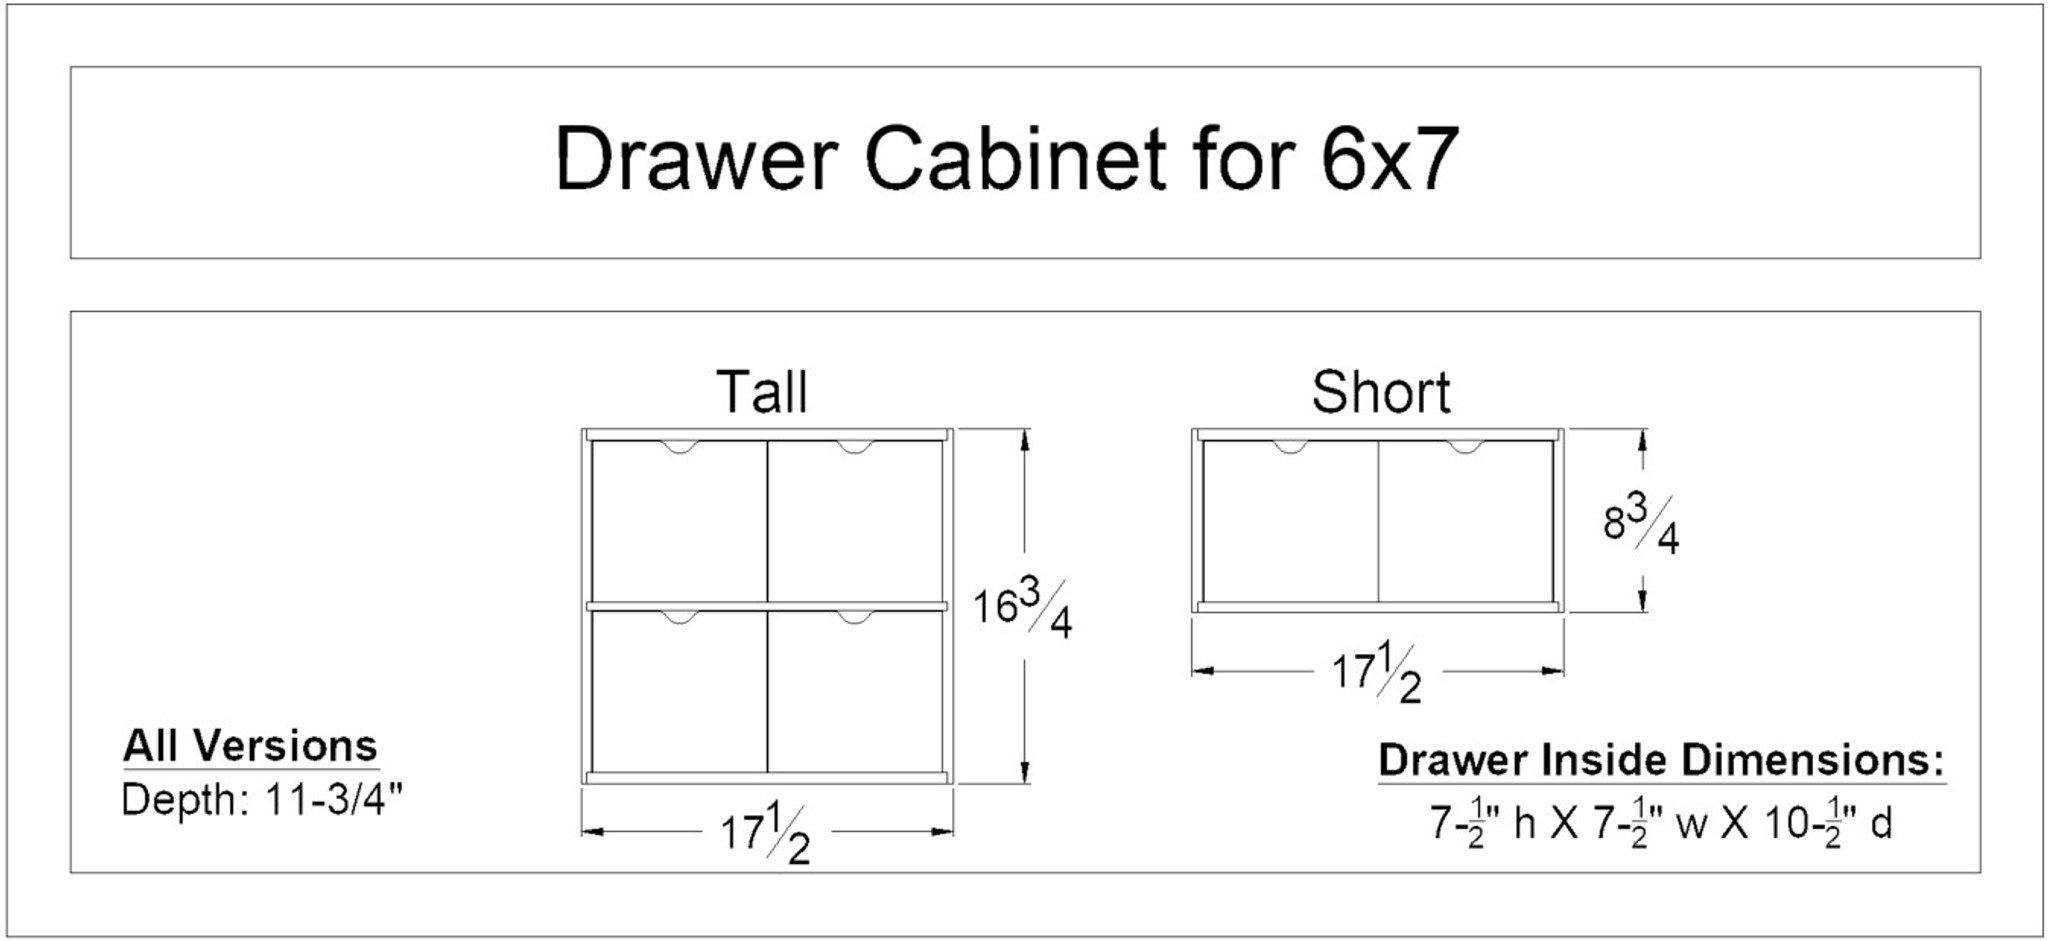 Drawer Cabinet for 6x7